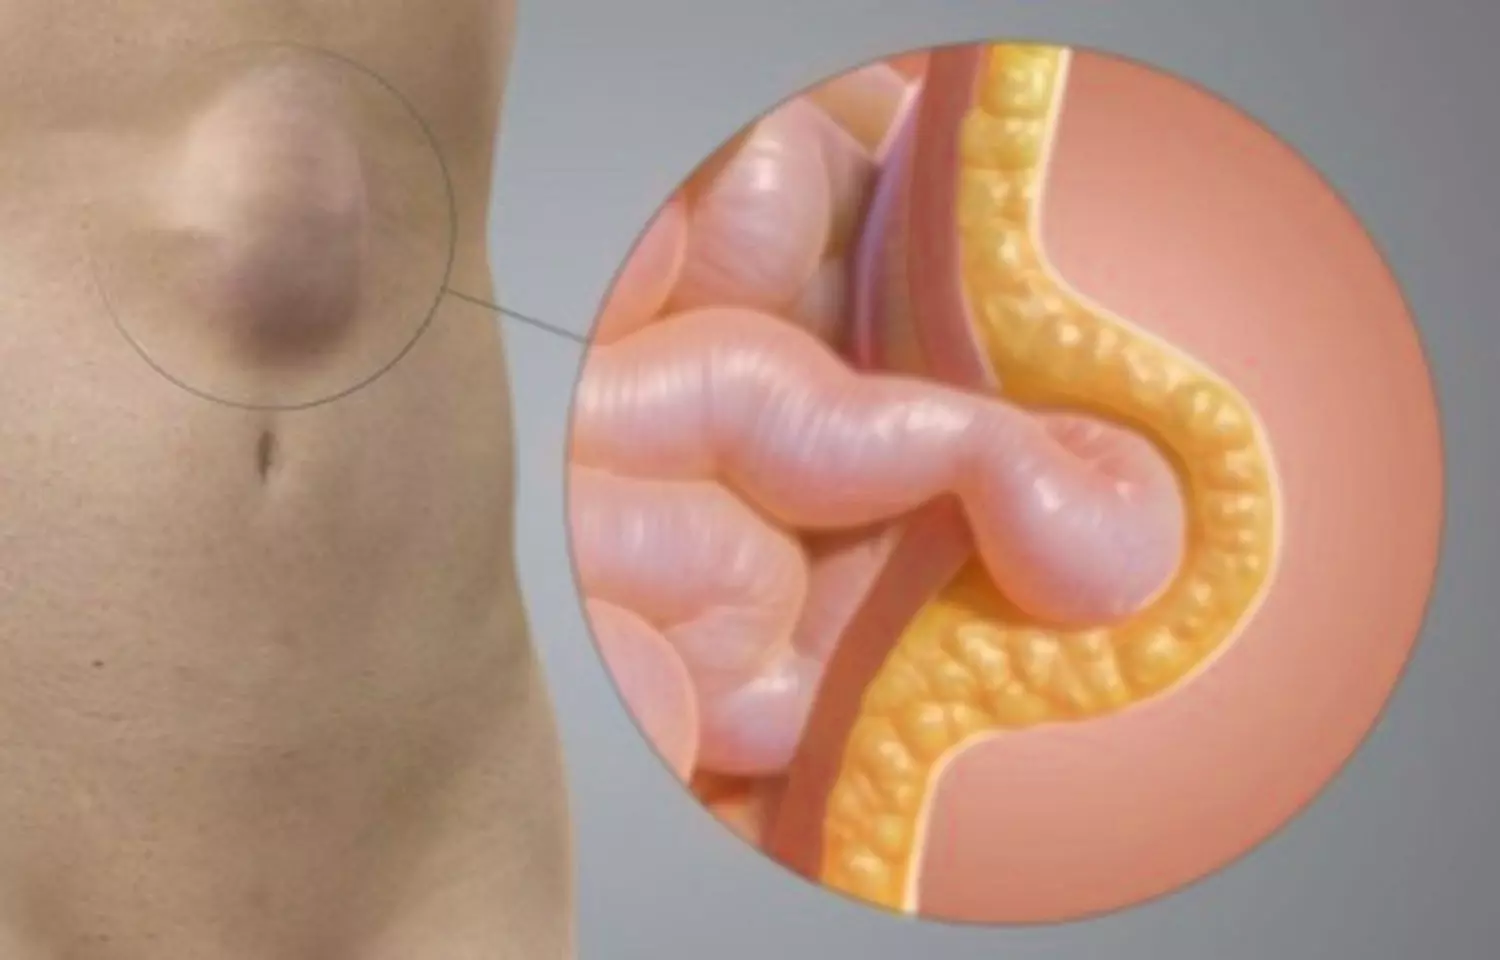 Incidence of incisional hernia high after colorectal surgery independent of suture technique